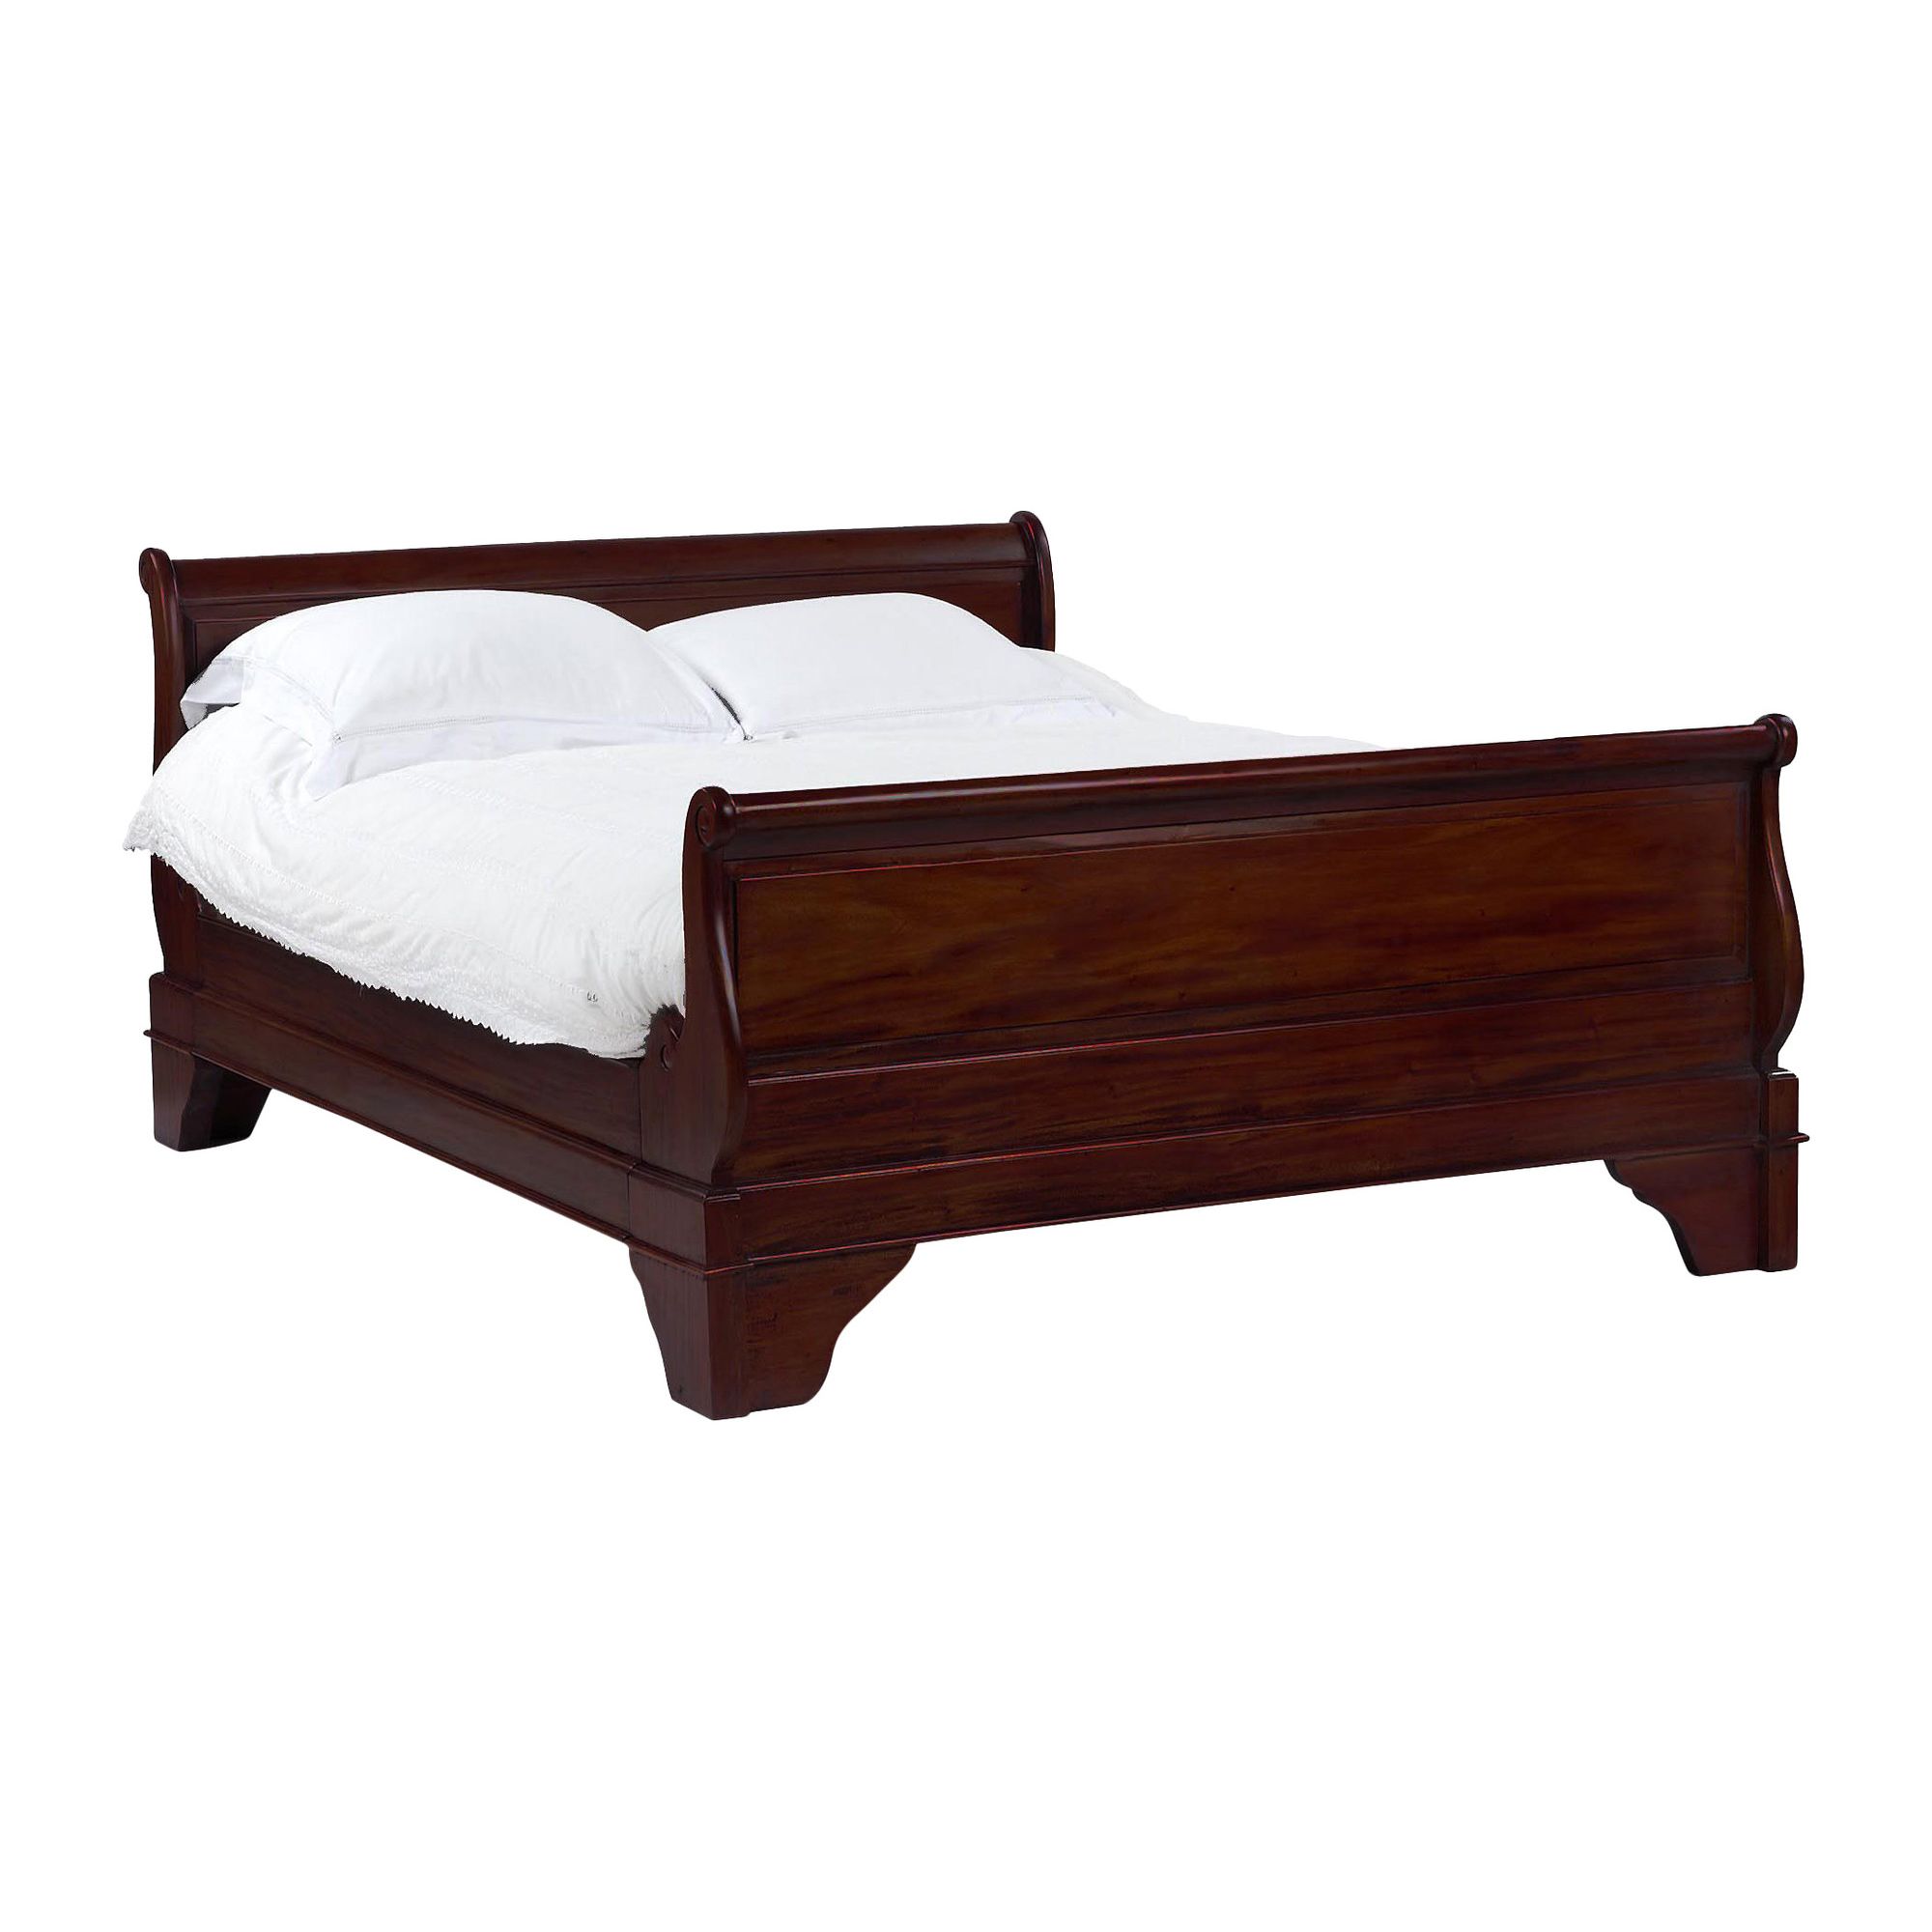 Anderson Bradshaw Colonial French Sleigh Bed Frame - Double at Tesco Direct